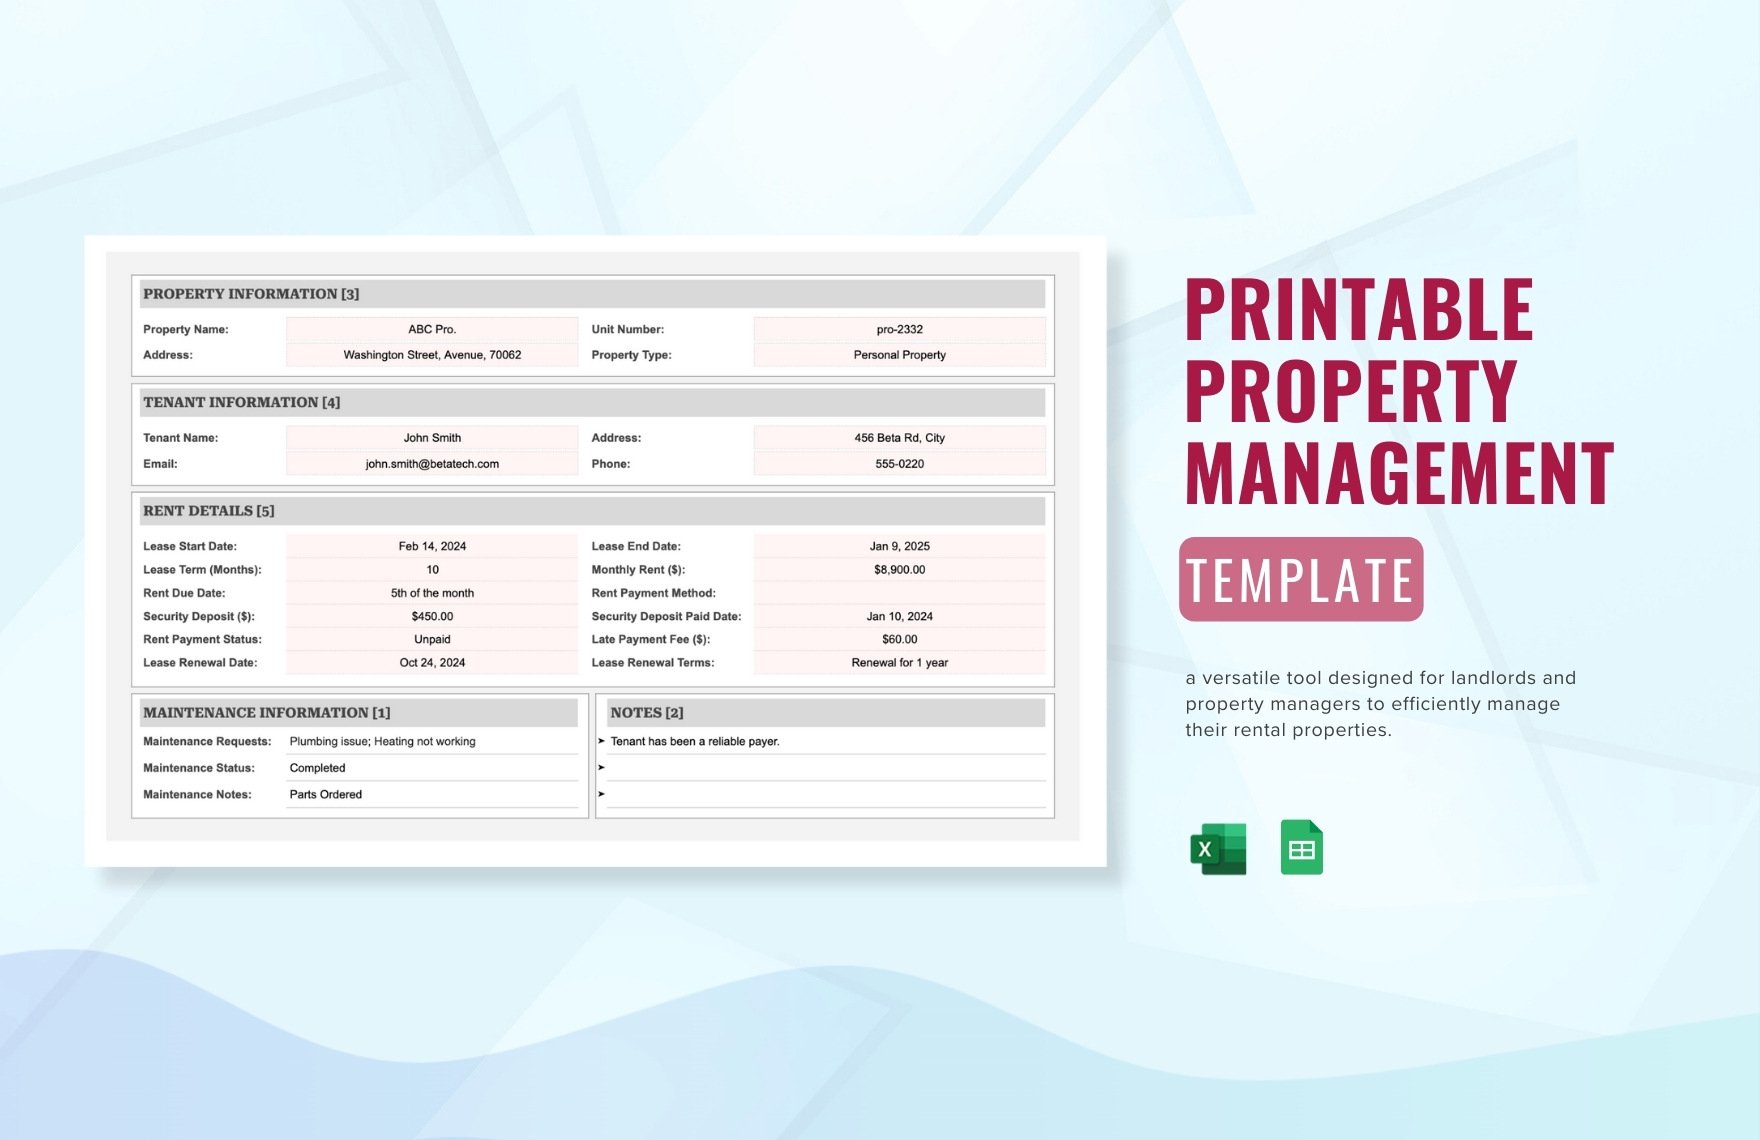 Printable Property Management Template in Excel, Google Sheets